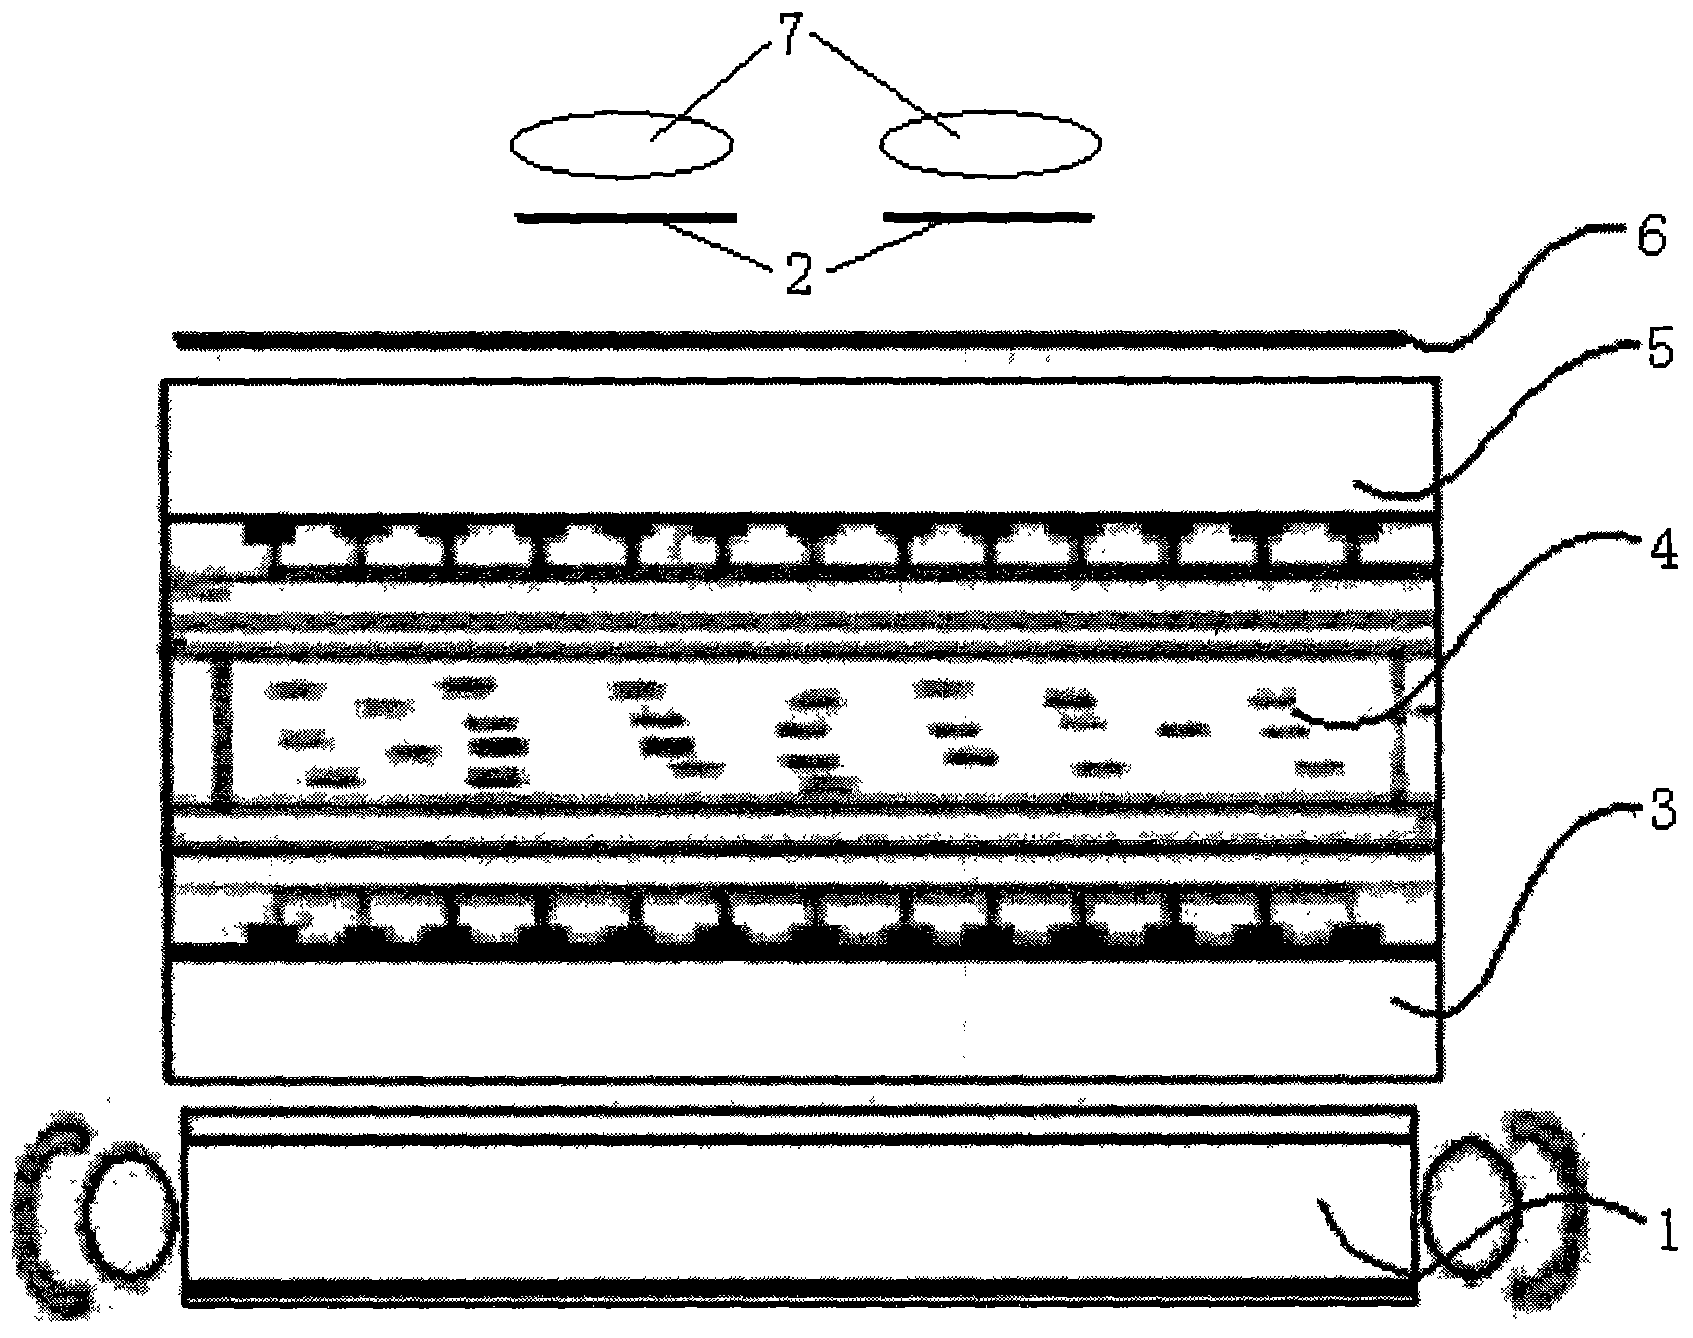 High-privacy liquid crystal displaying component